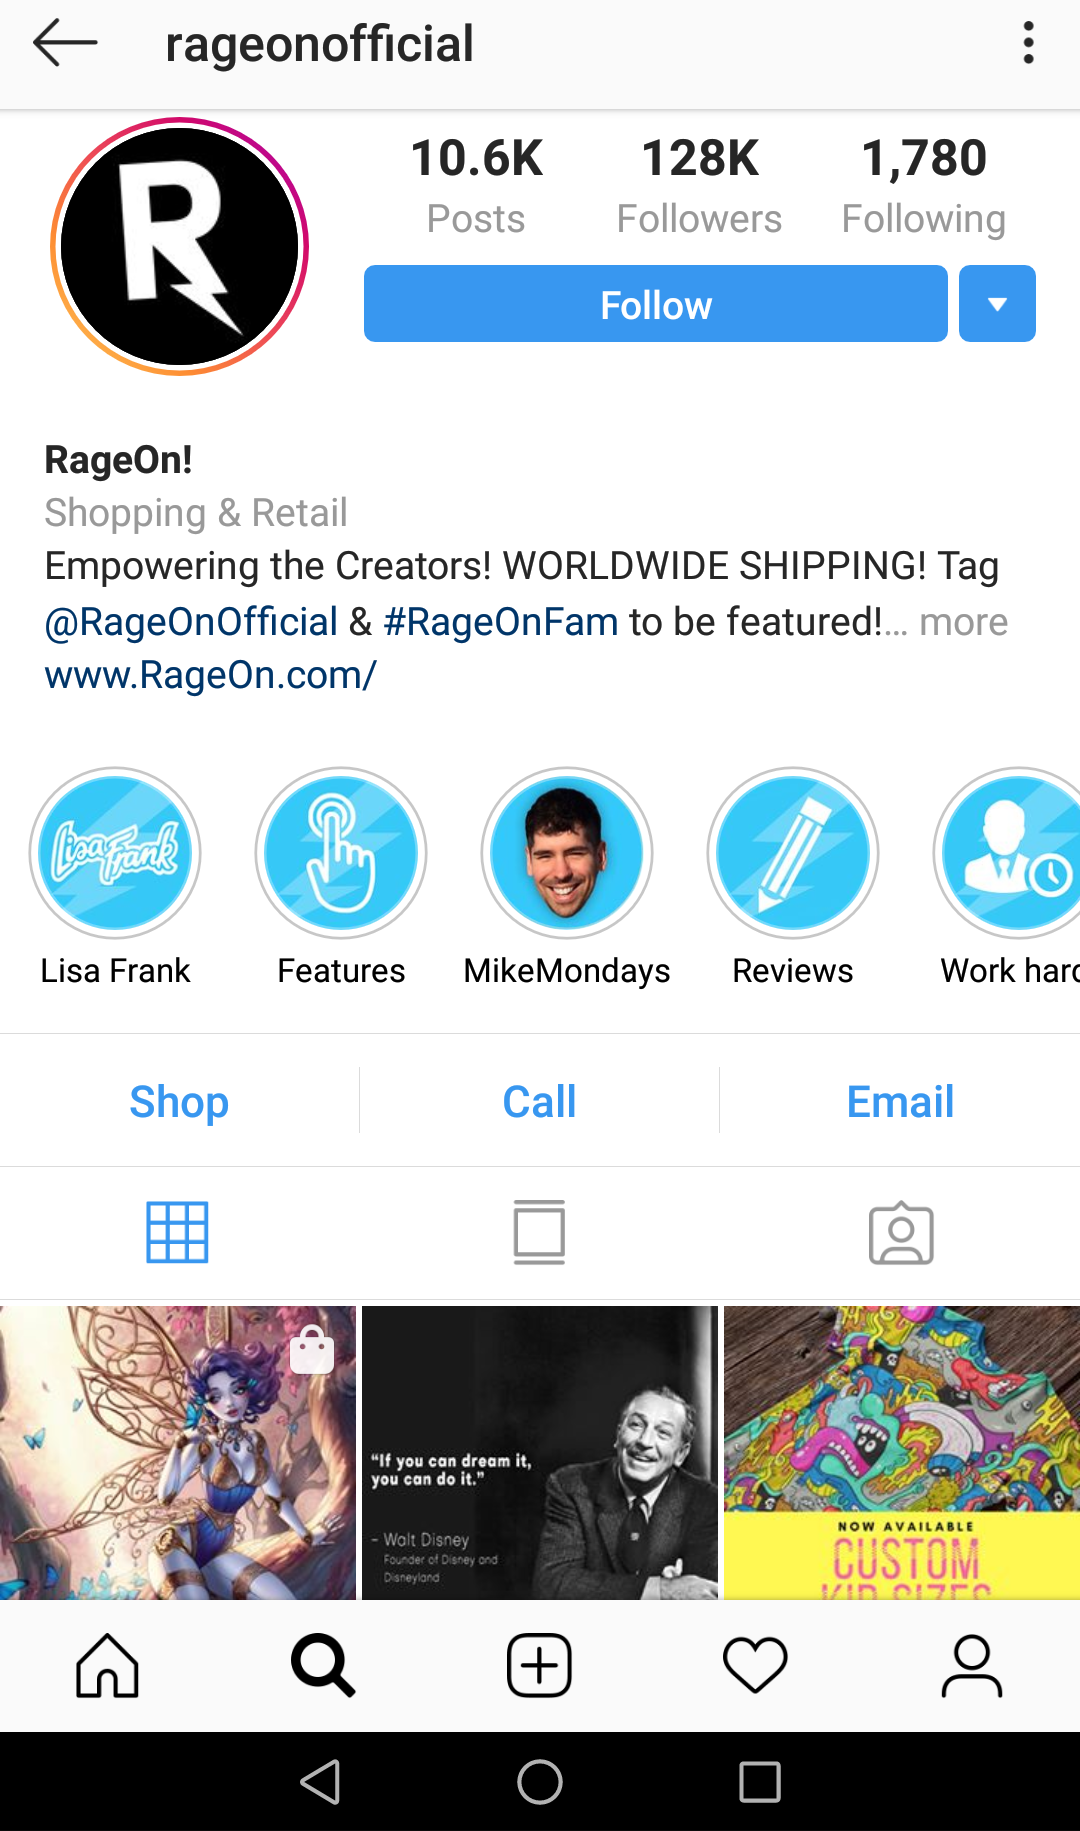 RageOn's bio leads directly to a mobile-optimized landing page